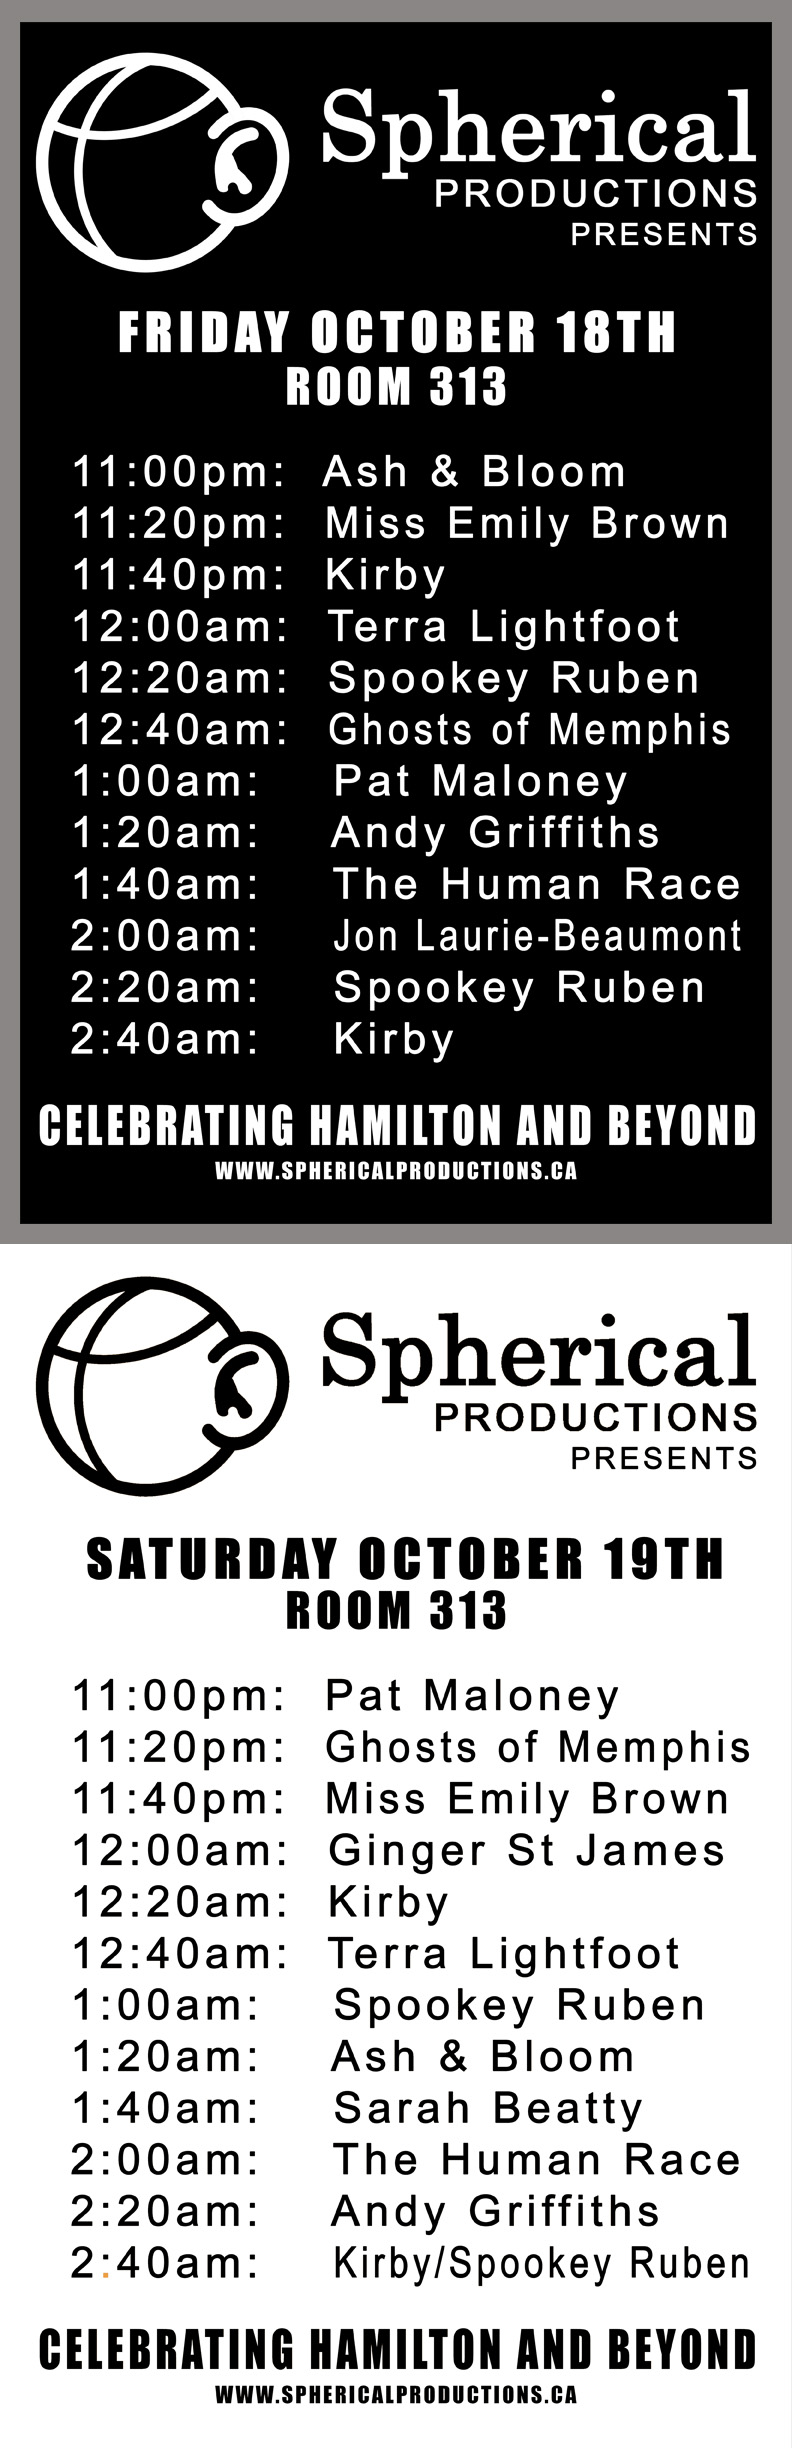 Spherical Productions at Folk Music Ontario this weekend!!!